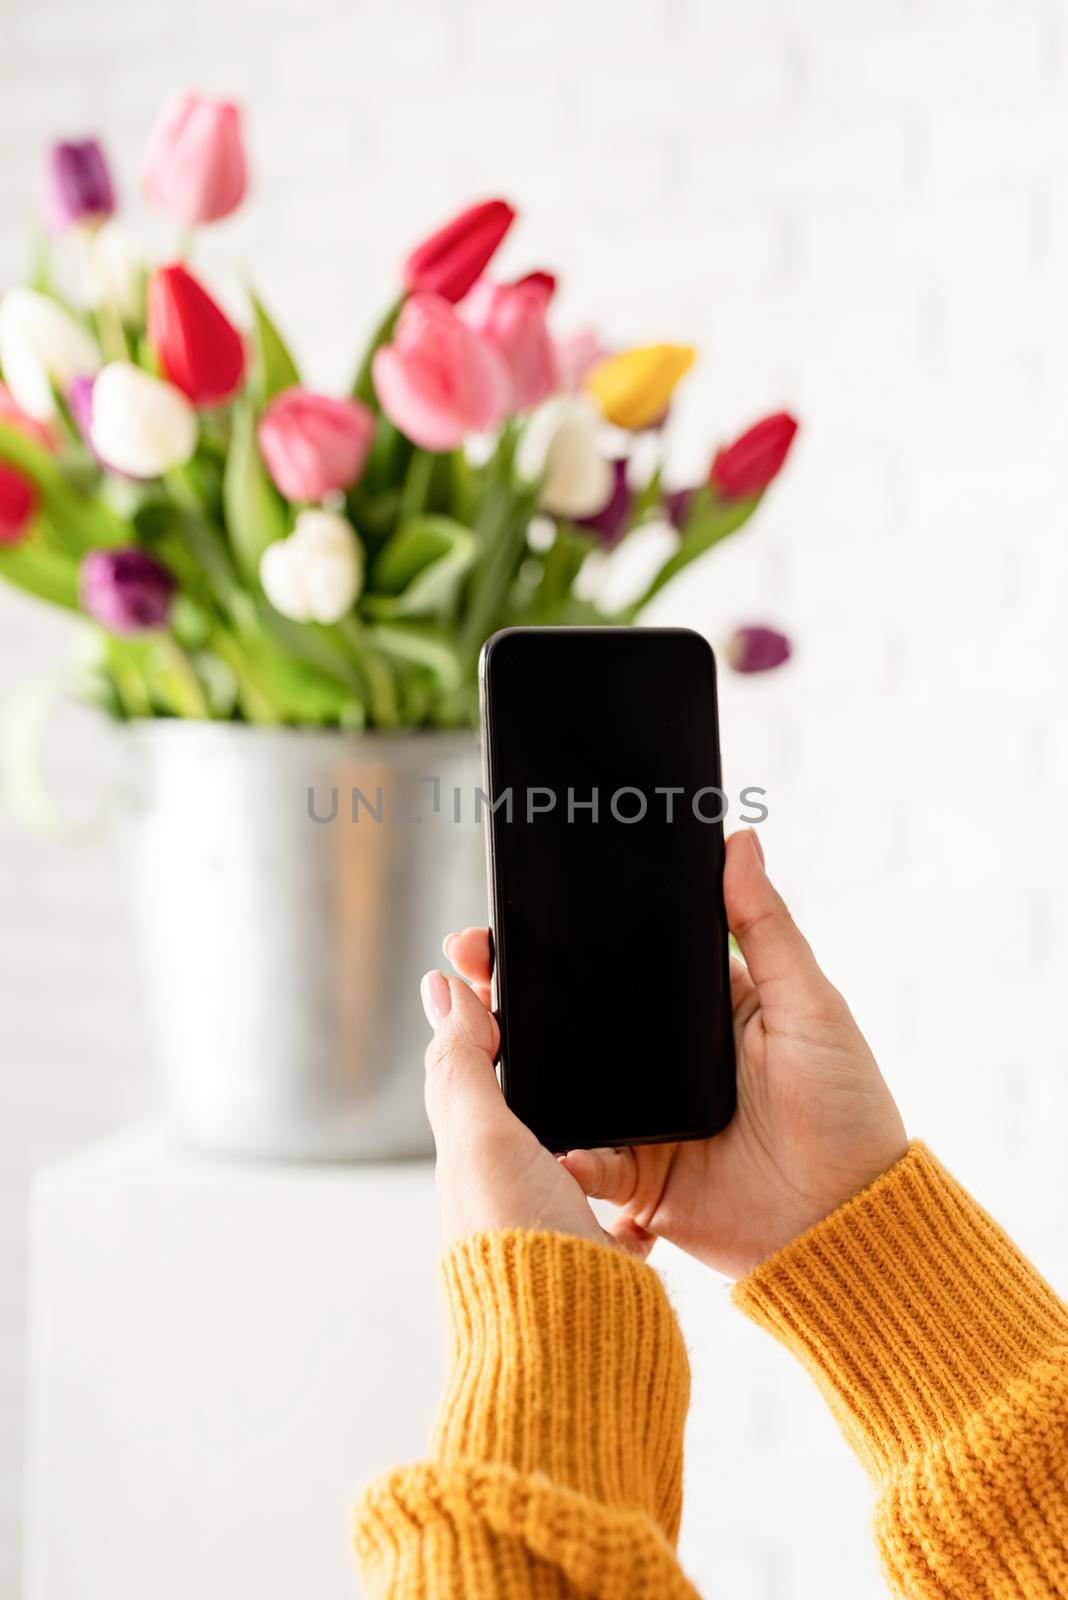 Female hand holding mobile phone taking picture of tulips flowers by Desperada